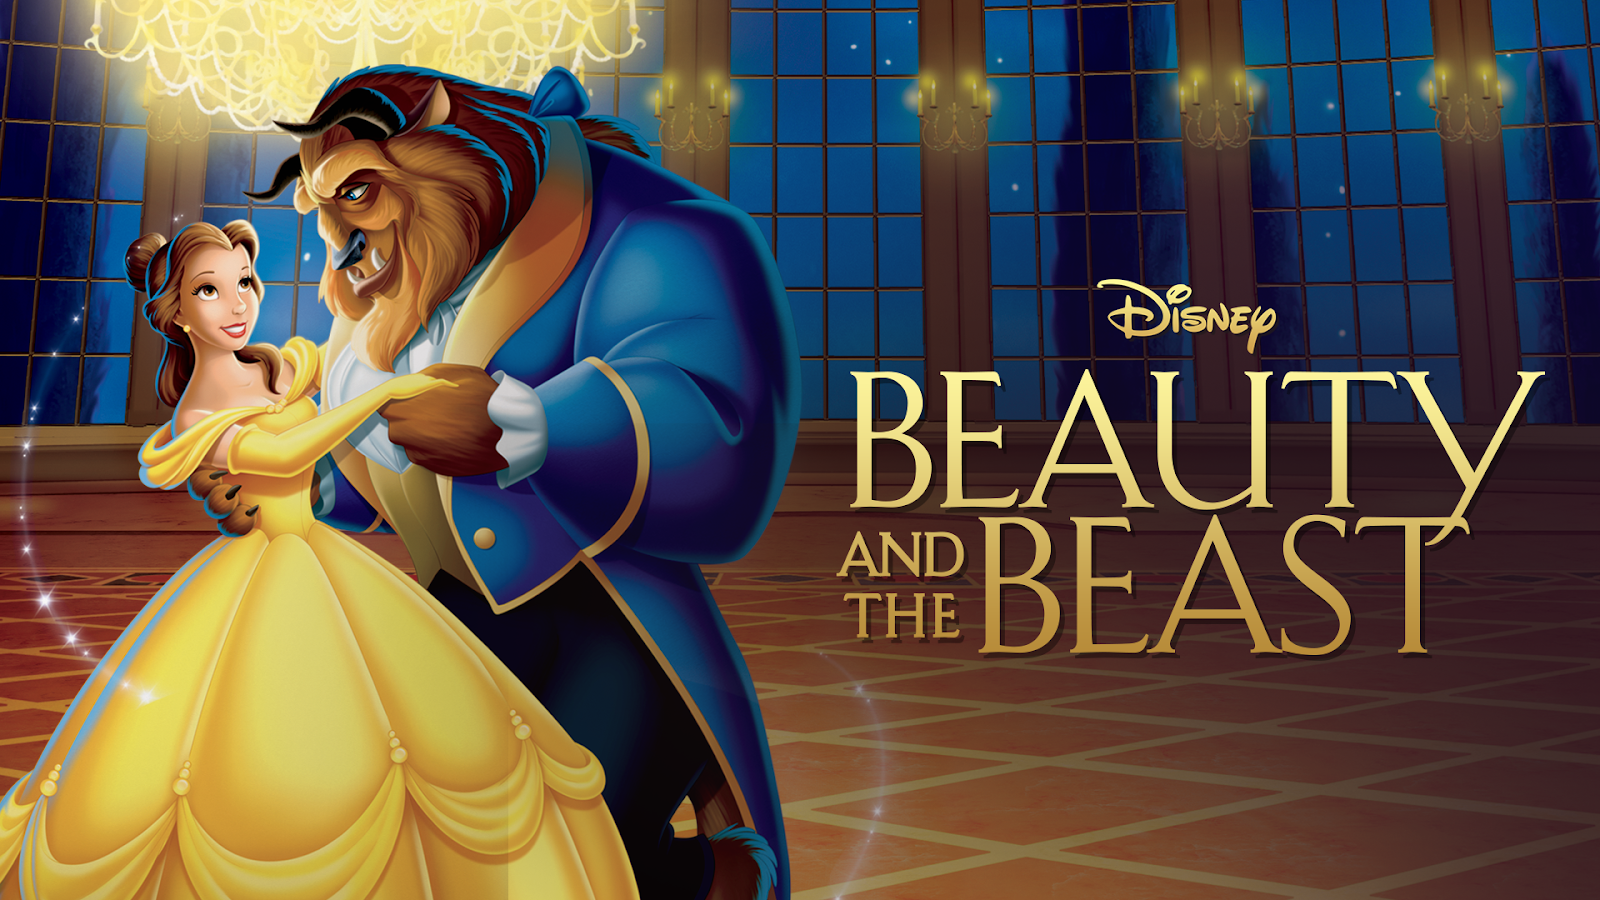 Animated Film Reviews: Beauty and the Beast (1991) - Disney's Animation ...